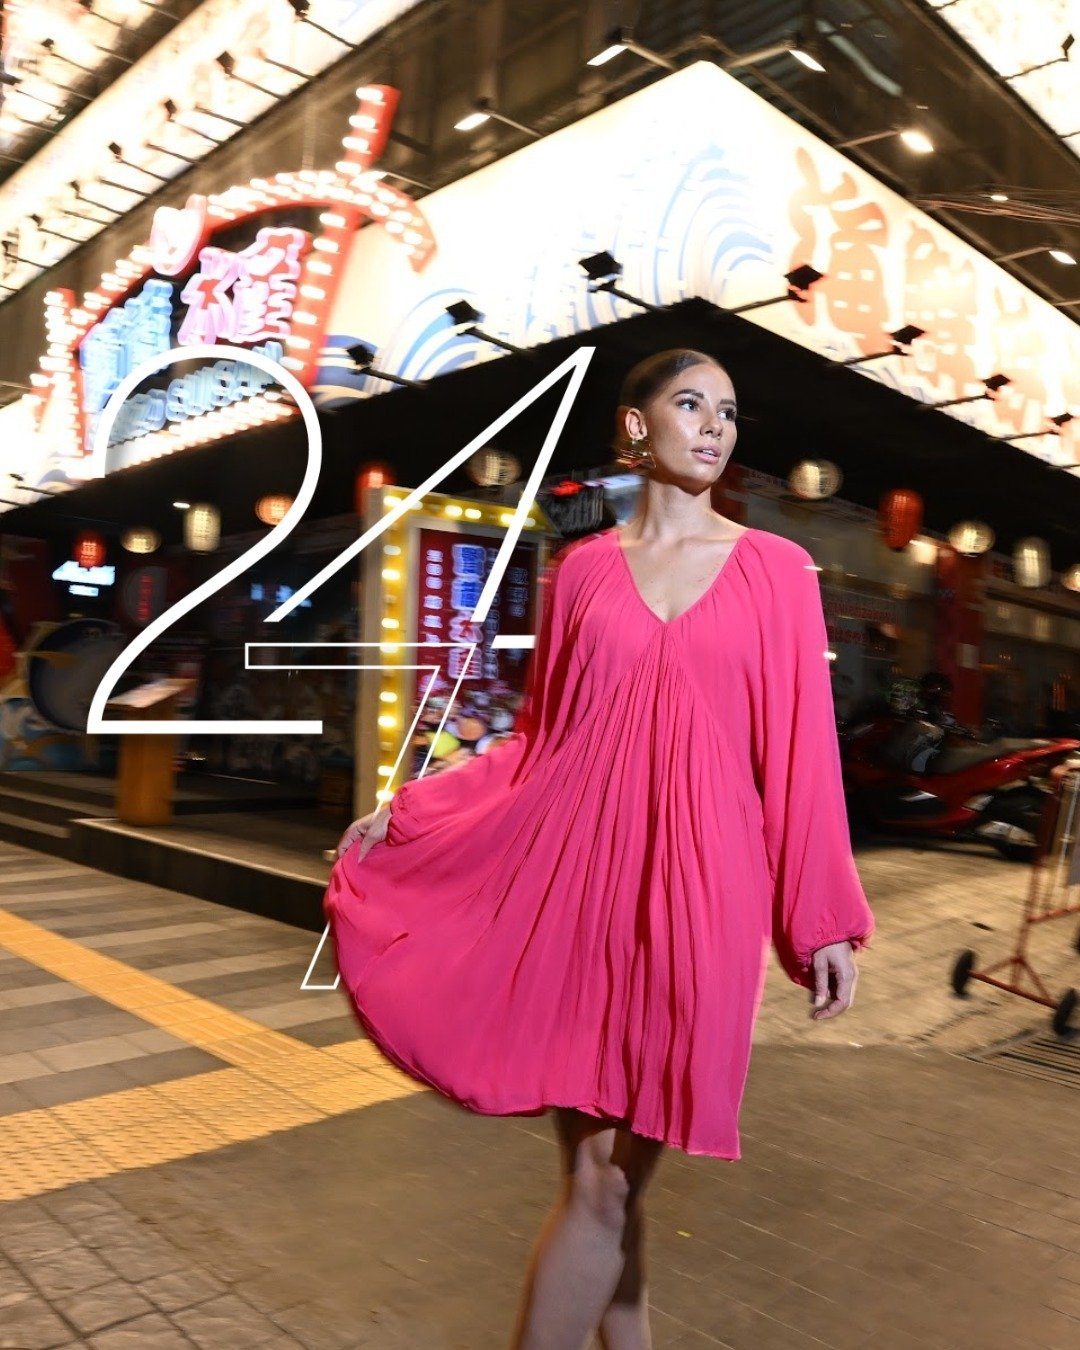 Experience the World Sealed Summit 24/7 Fashion Show! Mark your calendars for August 25th as we unveil our new, breathtaking collection in the vibrant heart of Bangkok, Thailand. Witness the culmination of diverse creativity as our designers present 